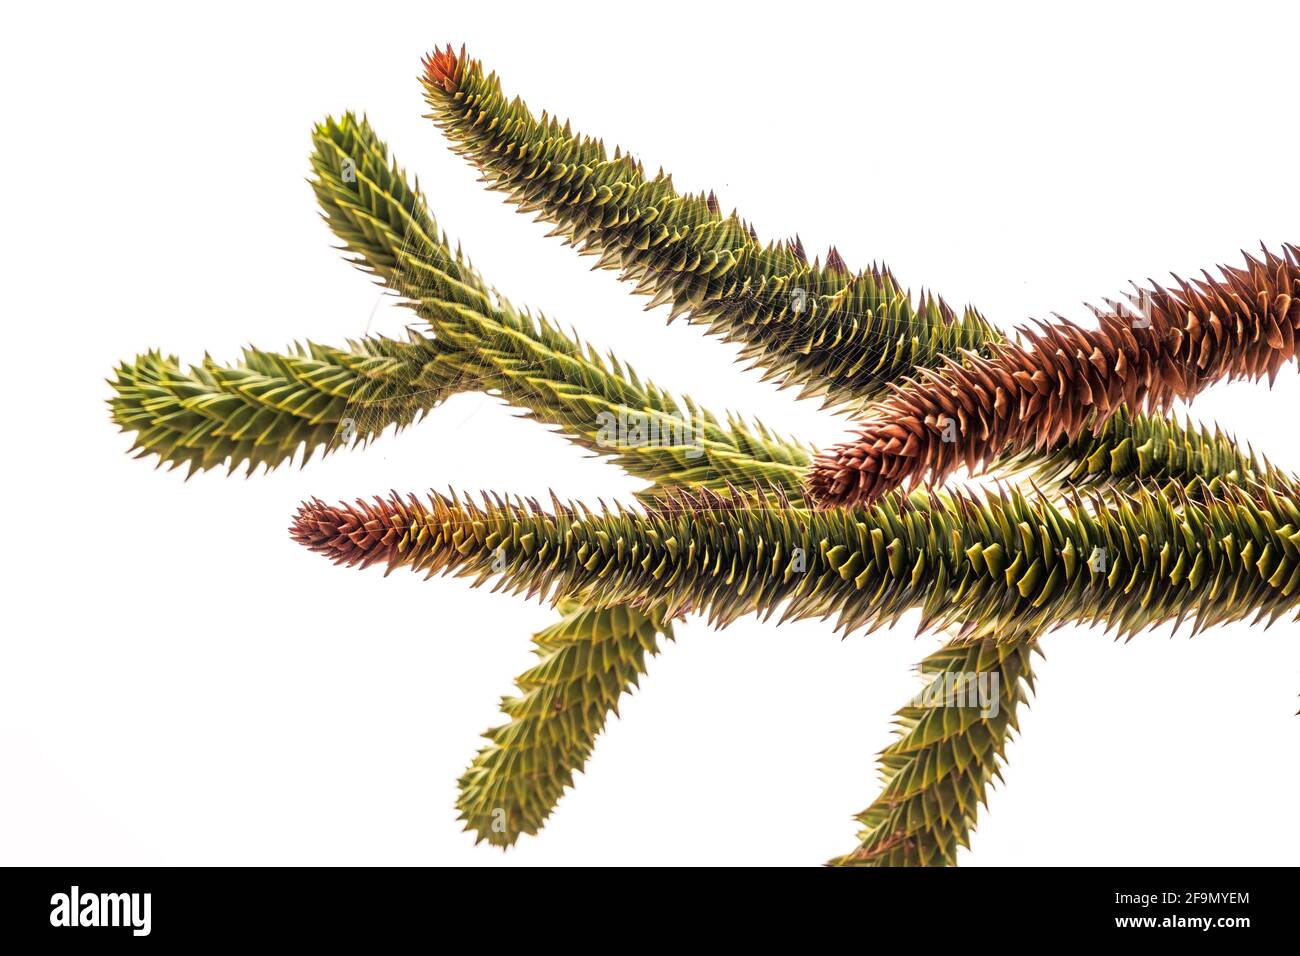 Needles of evergreen tree Araucaria araucana,commonly called the Monkey Puzzle Tree, Monkey Tail Tree, Pewen or Chilean Pine, isolated on white backgr Stock Photo